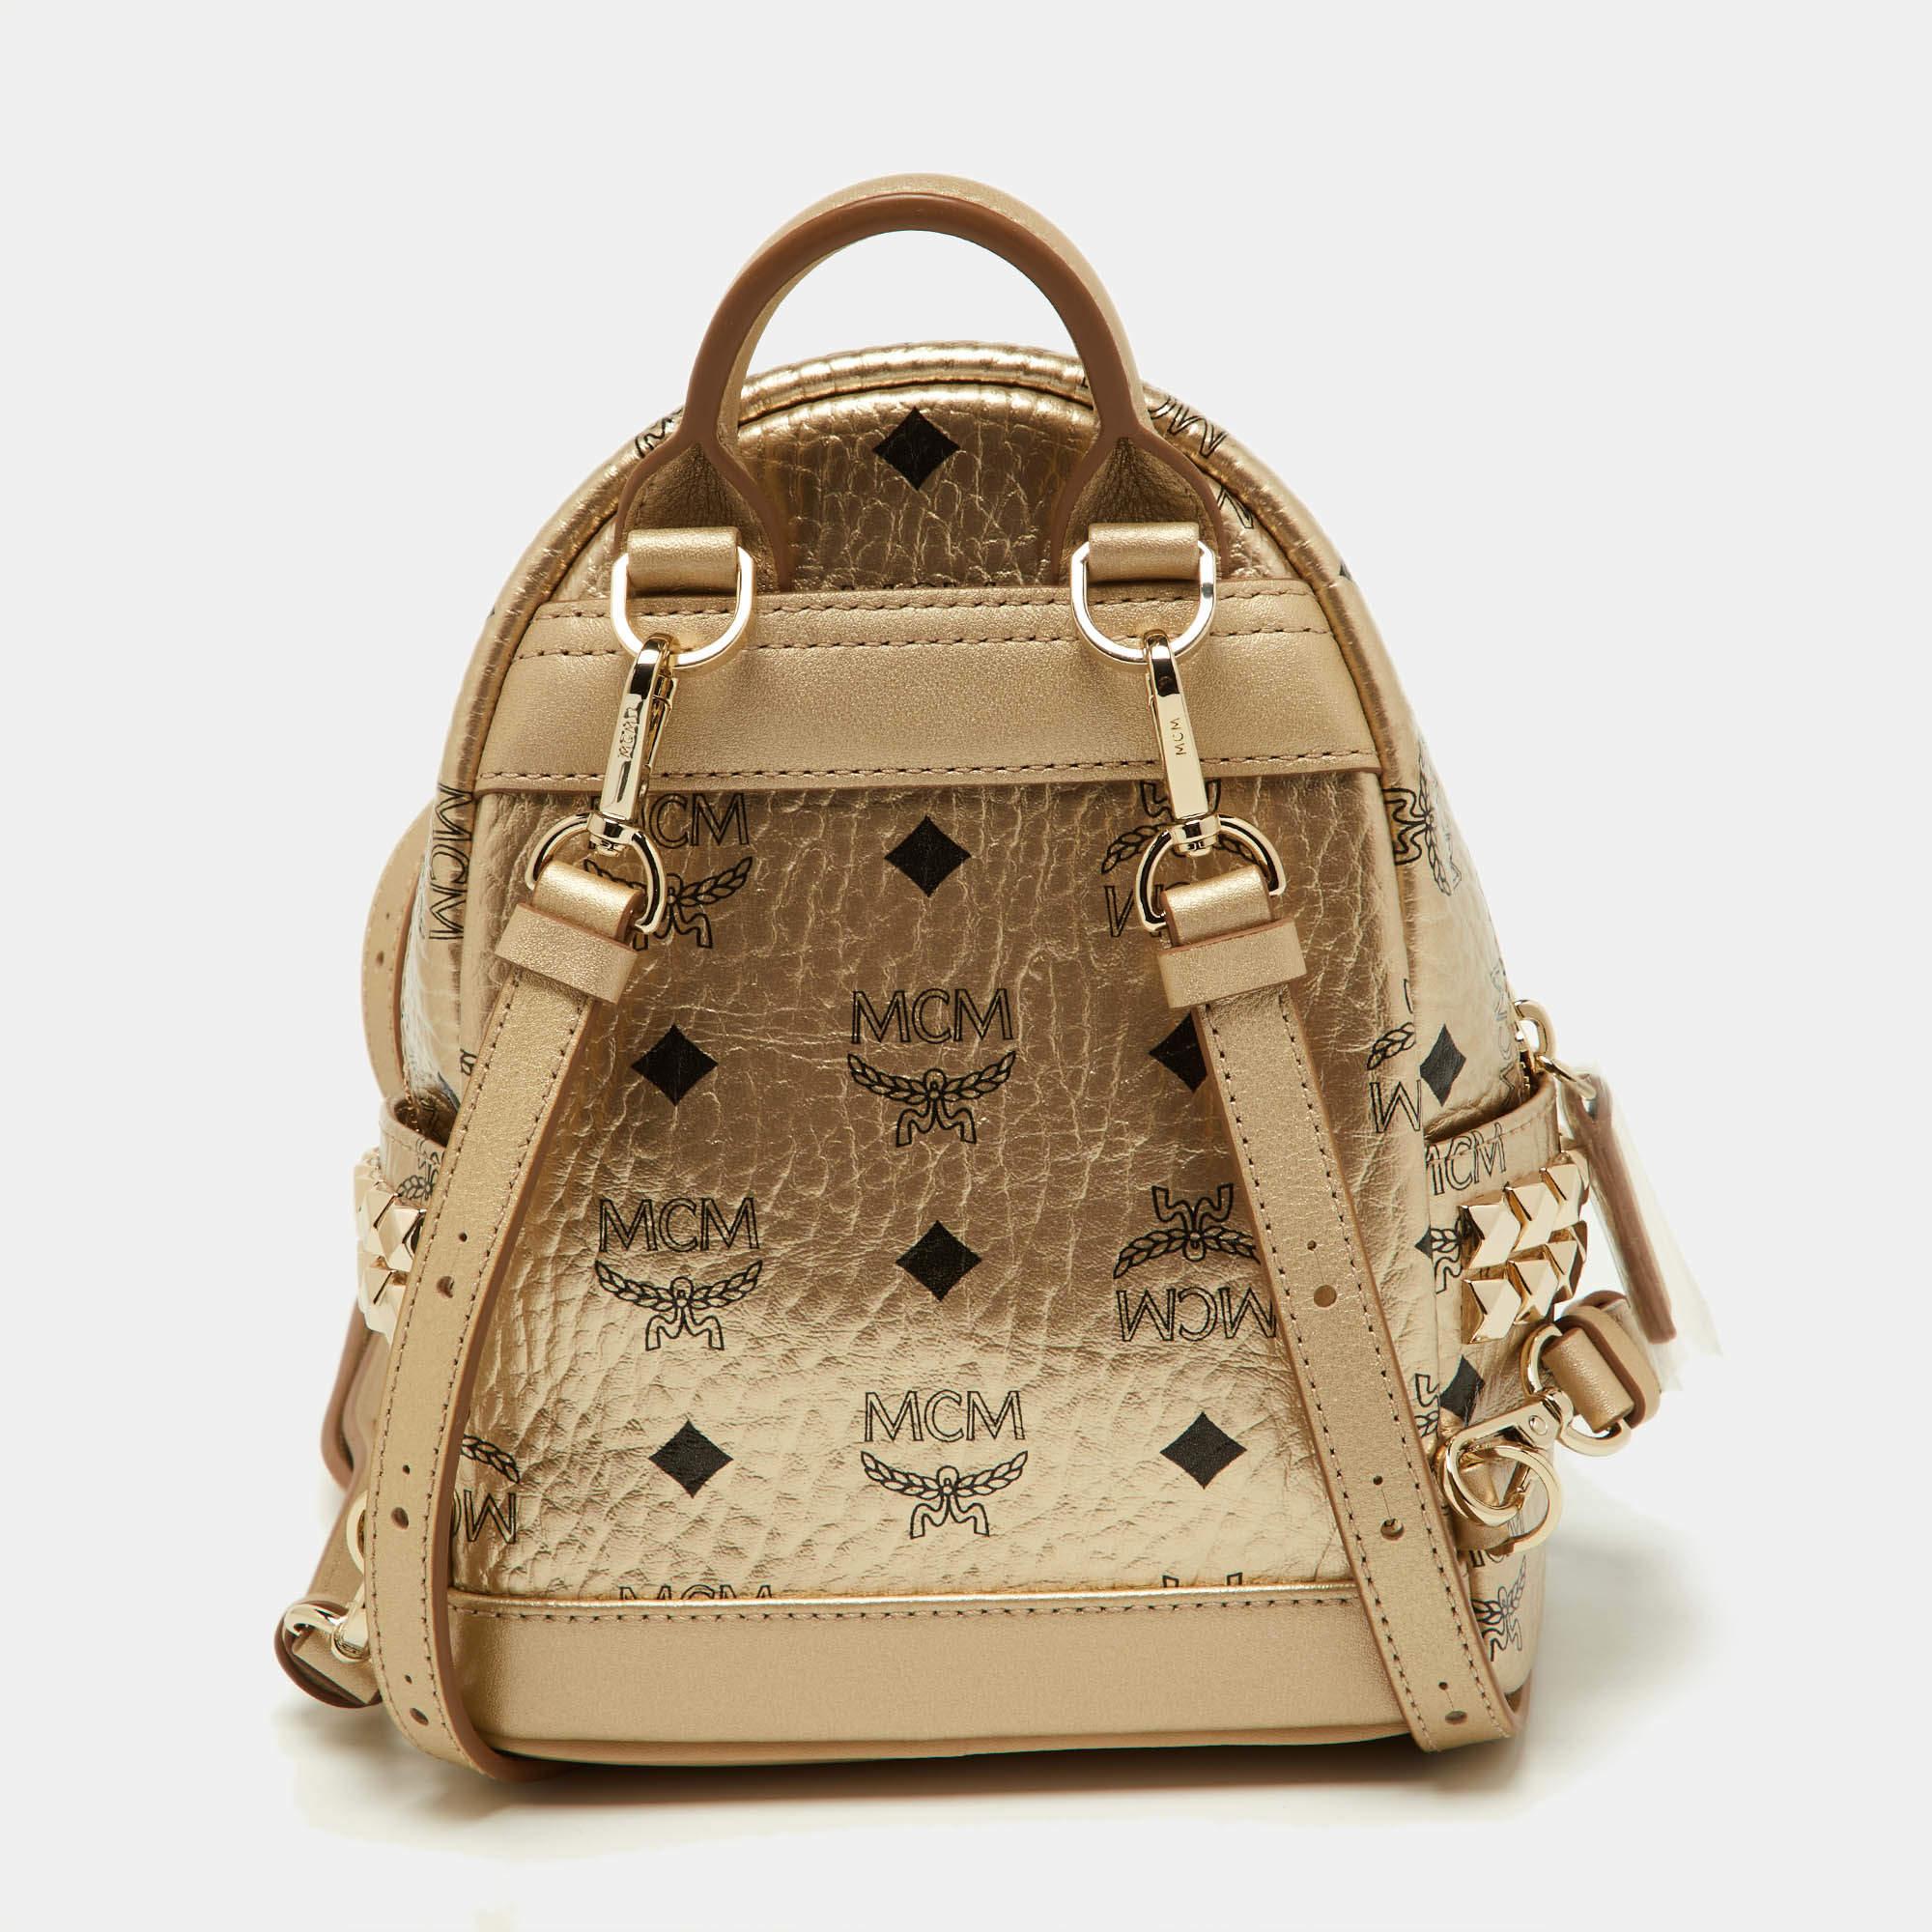 This MCM Stark-Bebe Boo backpack will come in handy for daily use or as a style statement. It is crafted from Visetos-coated canvas and leather and designed with gold-tone metal. It features a front zip pocket and two slip pockets on the